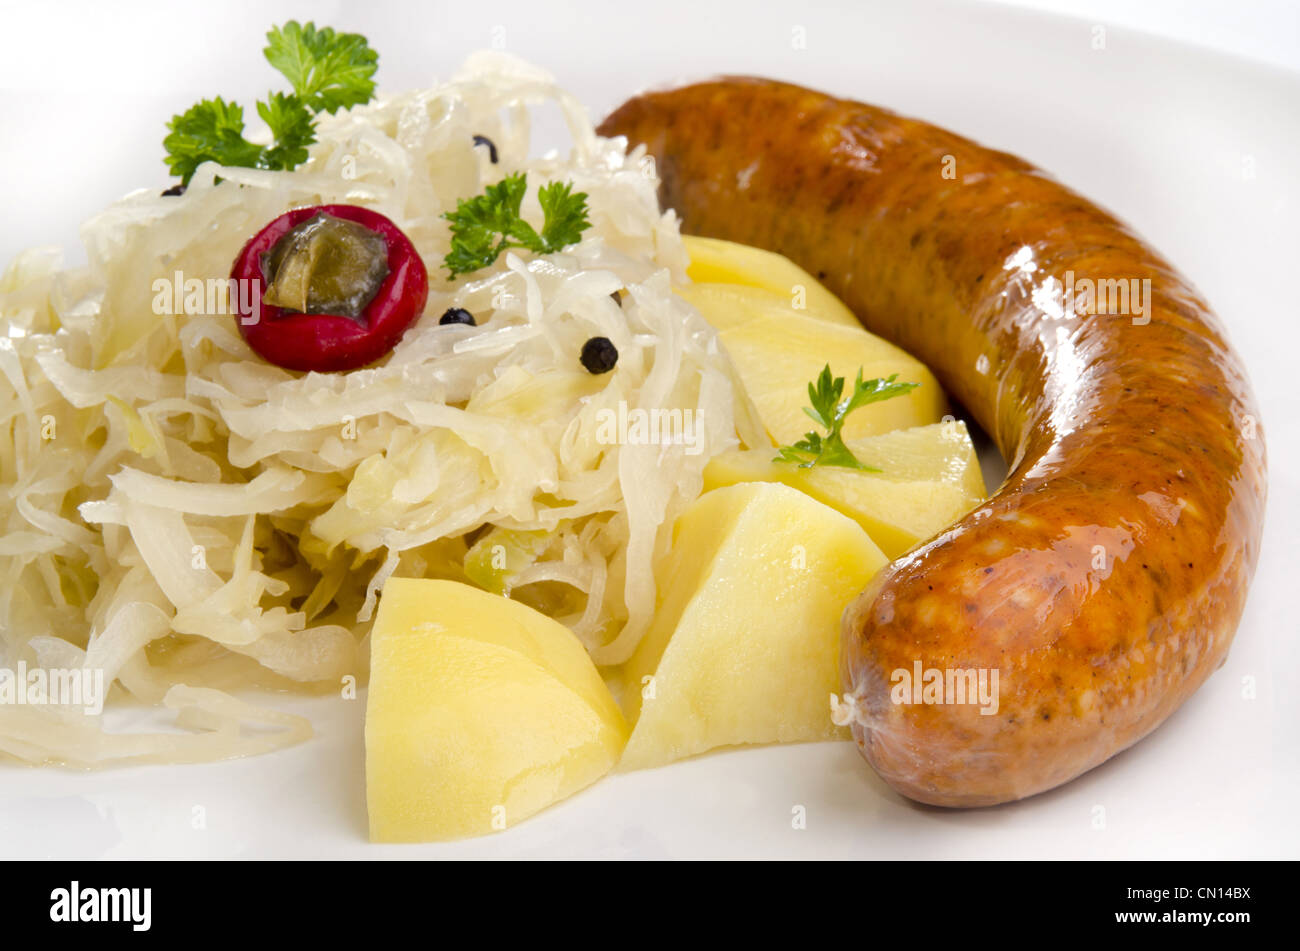 Sauerkraut with noodle and home made sausage on a white plate Stock Photo